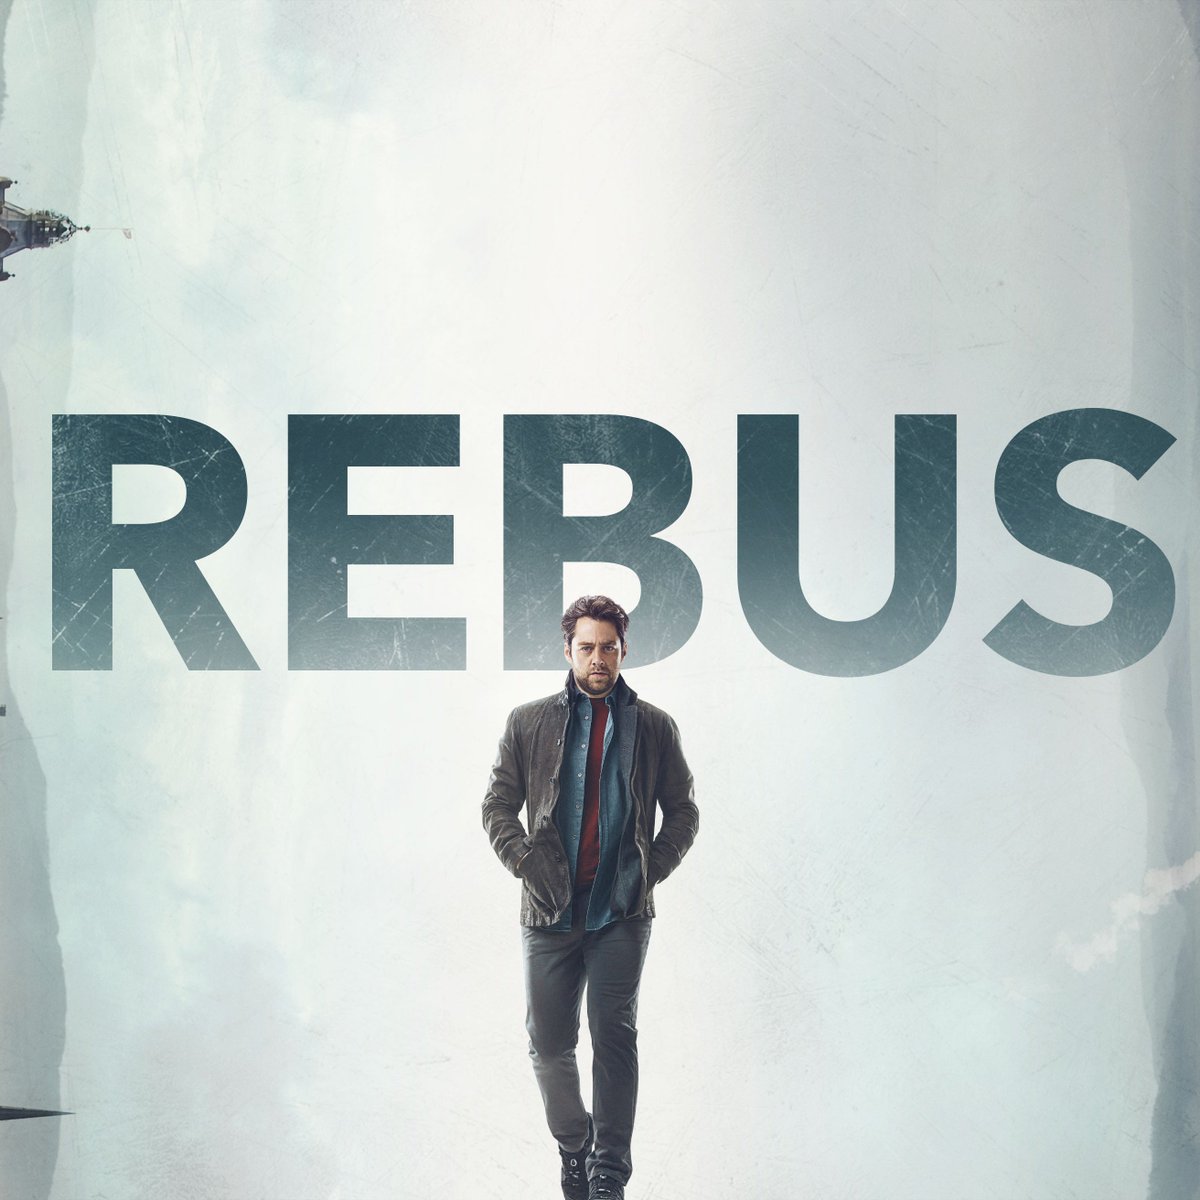 The BBC has announced a release date for its new adaptation of Sir Ian Rankin's best-selling Inspector Rebus novels. The new series, which stars Outlander's Richard Rankin, will be released on BBC iPlayer at 6AM on Friday, 17 May before airing on TV on Saturday, May 18.